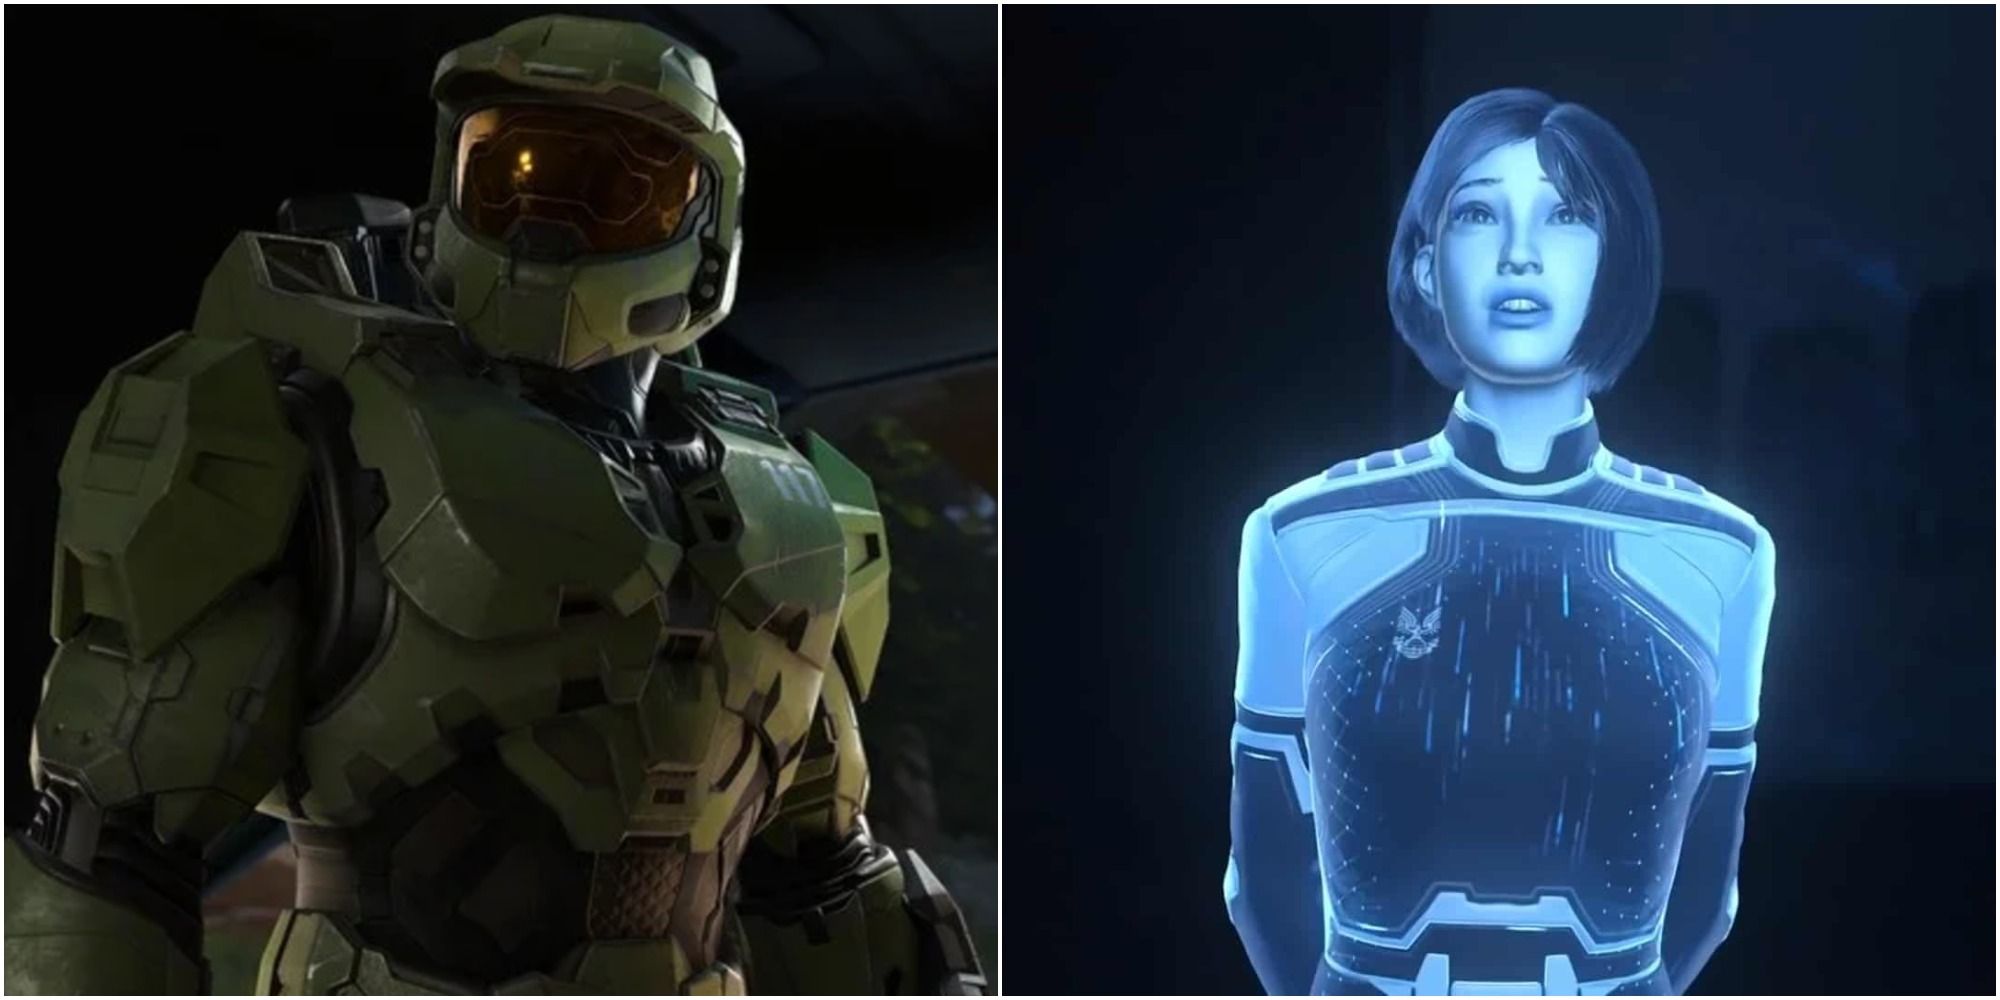 Halo Infinite wants you to pay for its most iconic armor set